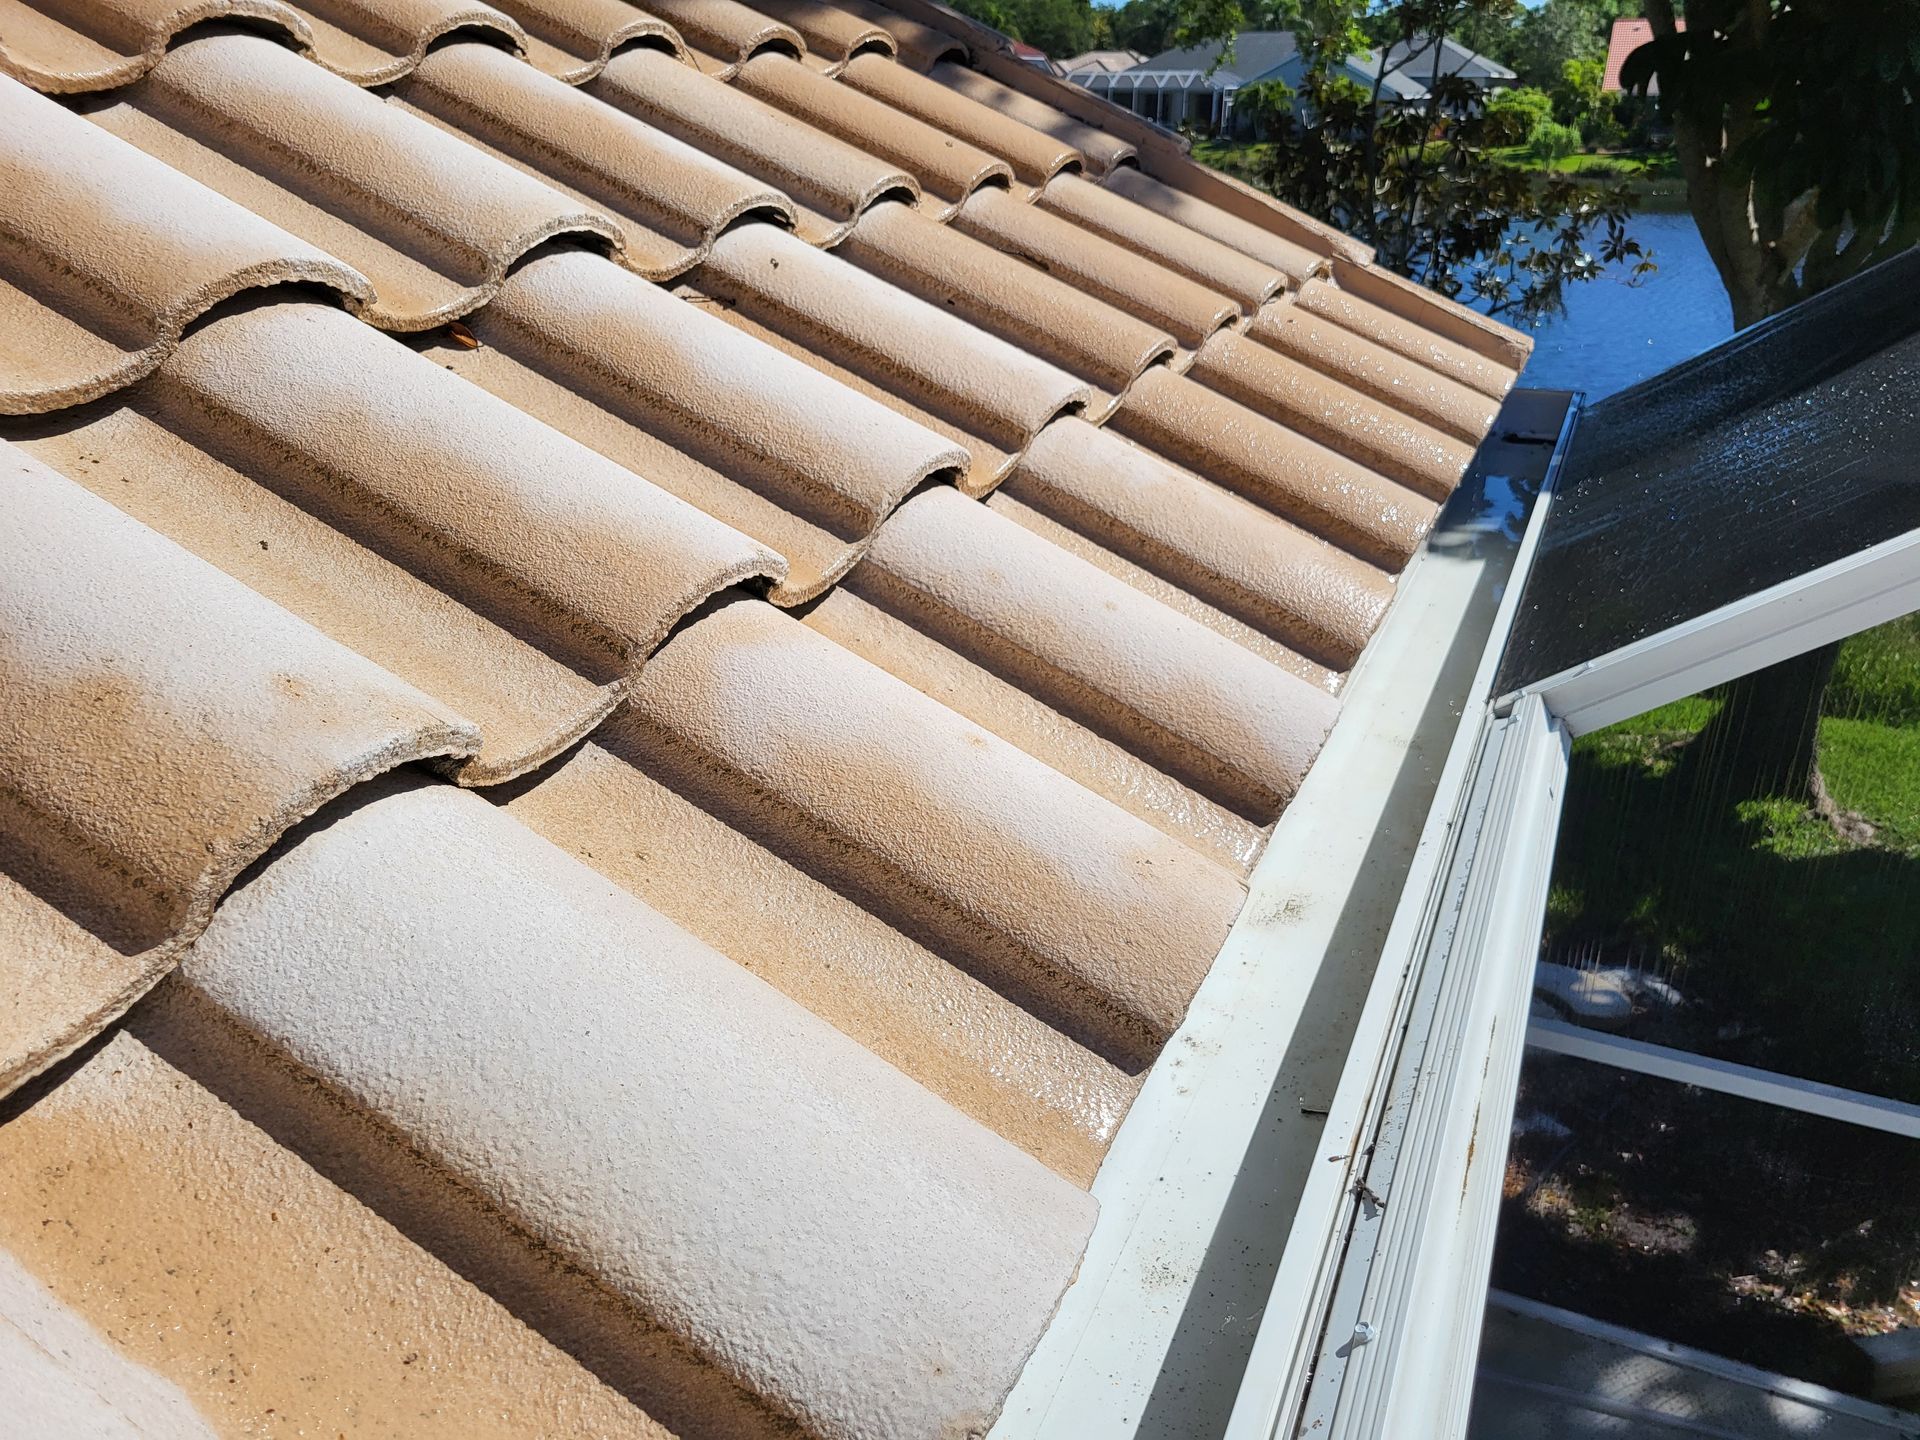 A close up of a tiled roof with a white gutter